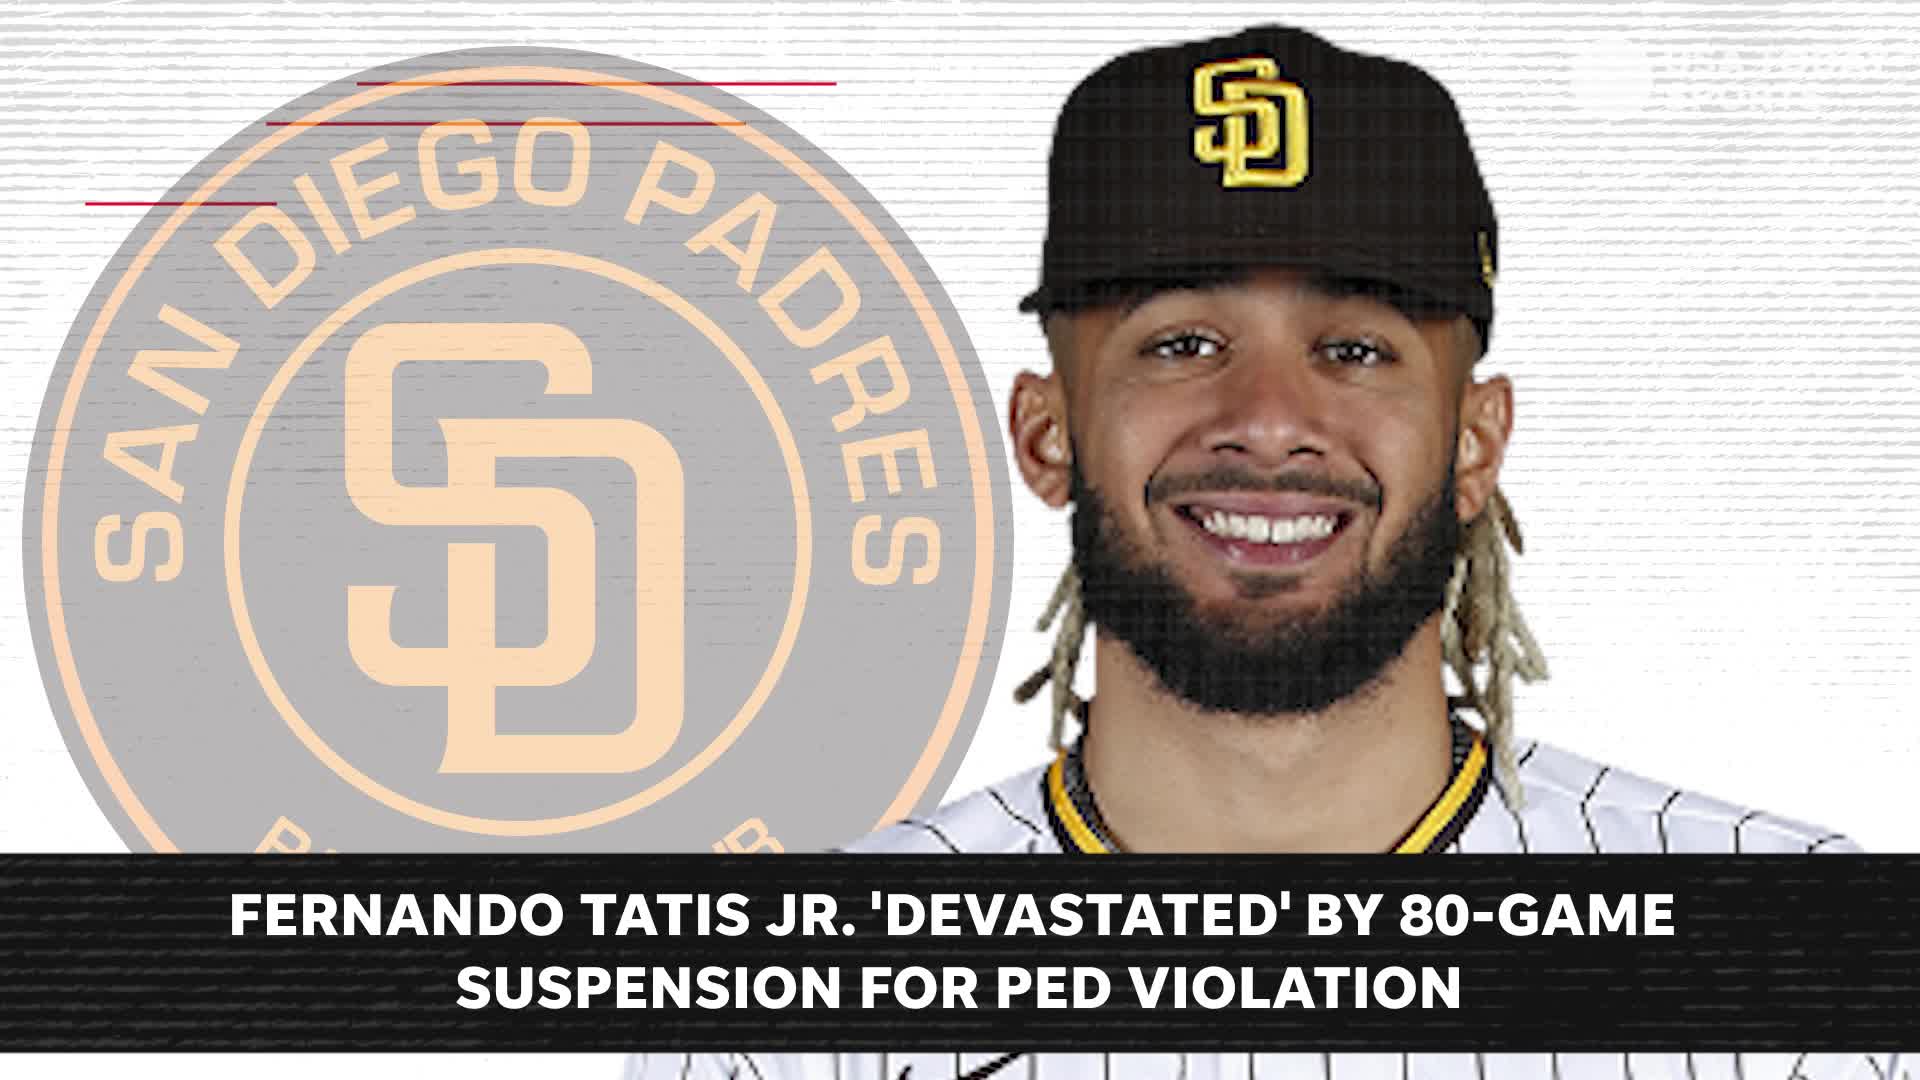 Fernando Tatis Jr. Suspended 80 Games for PED Use - The New York Times